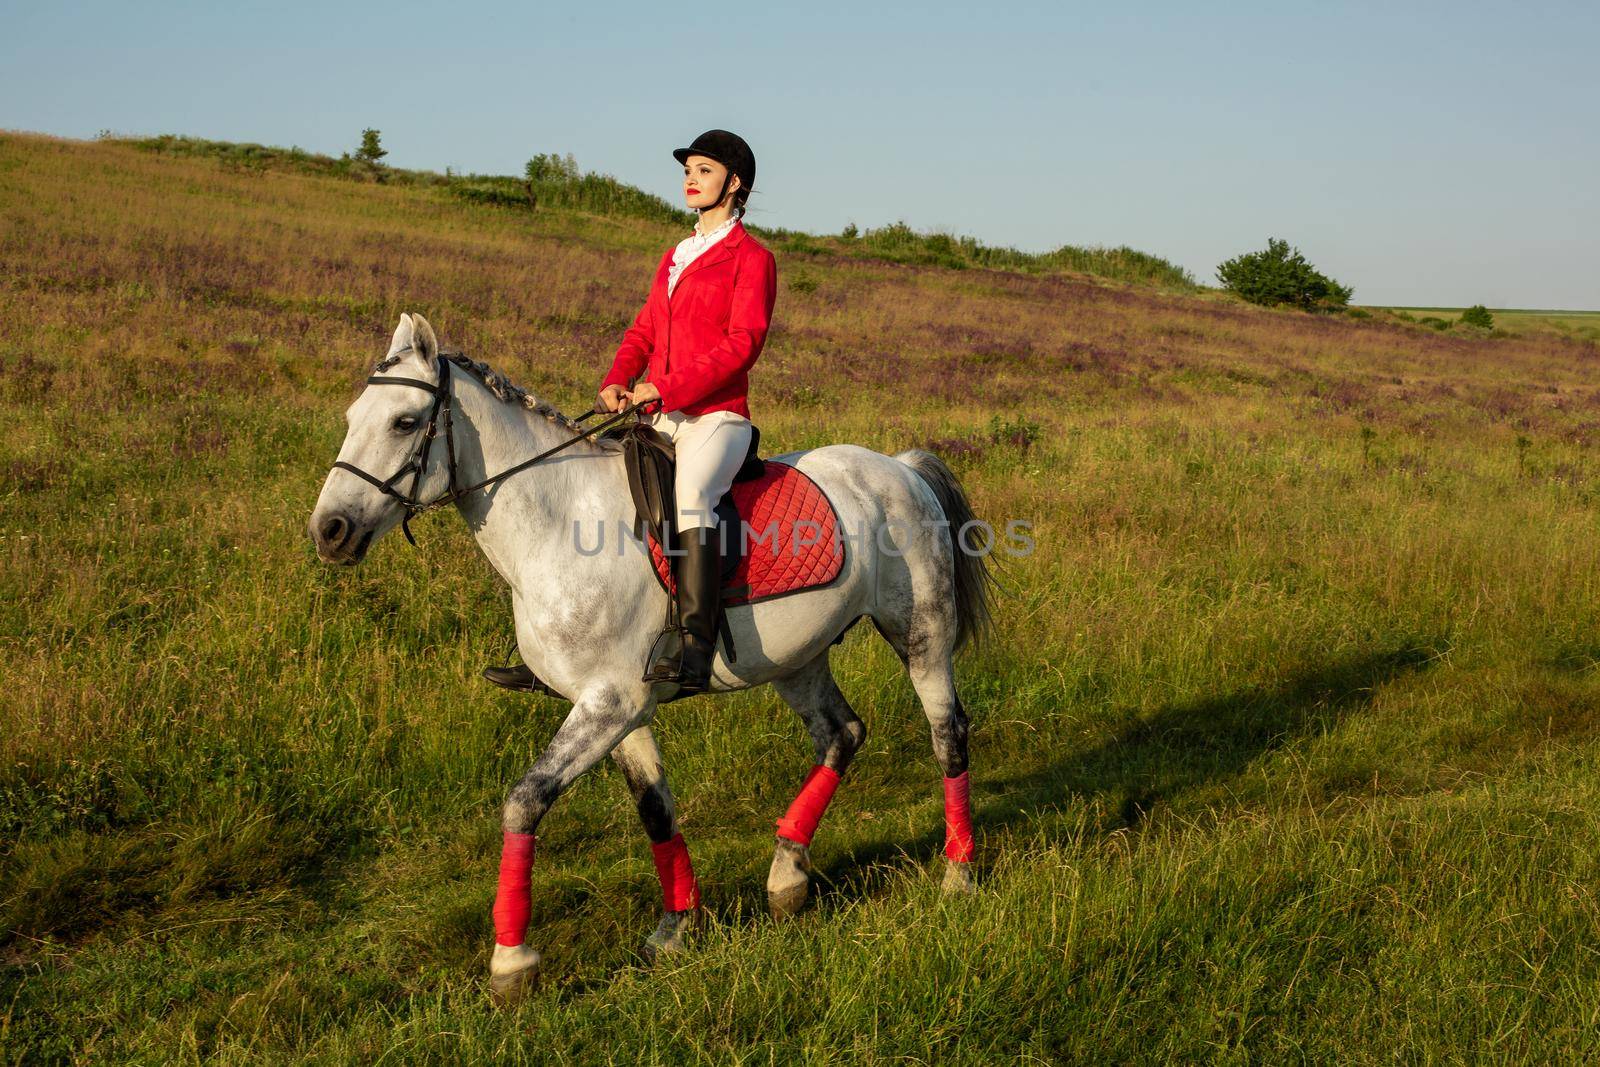 The sportswoman on a horse. The horsewoman on a red horse. Equestrianism. Horse riding. racing. Rider on a horse.